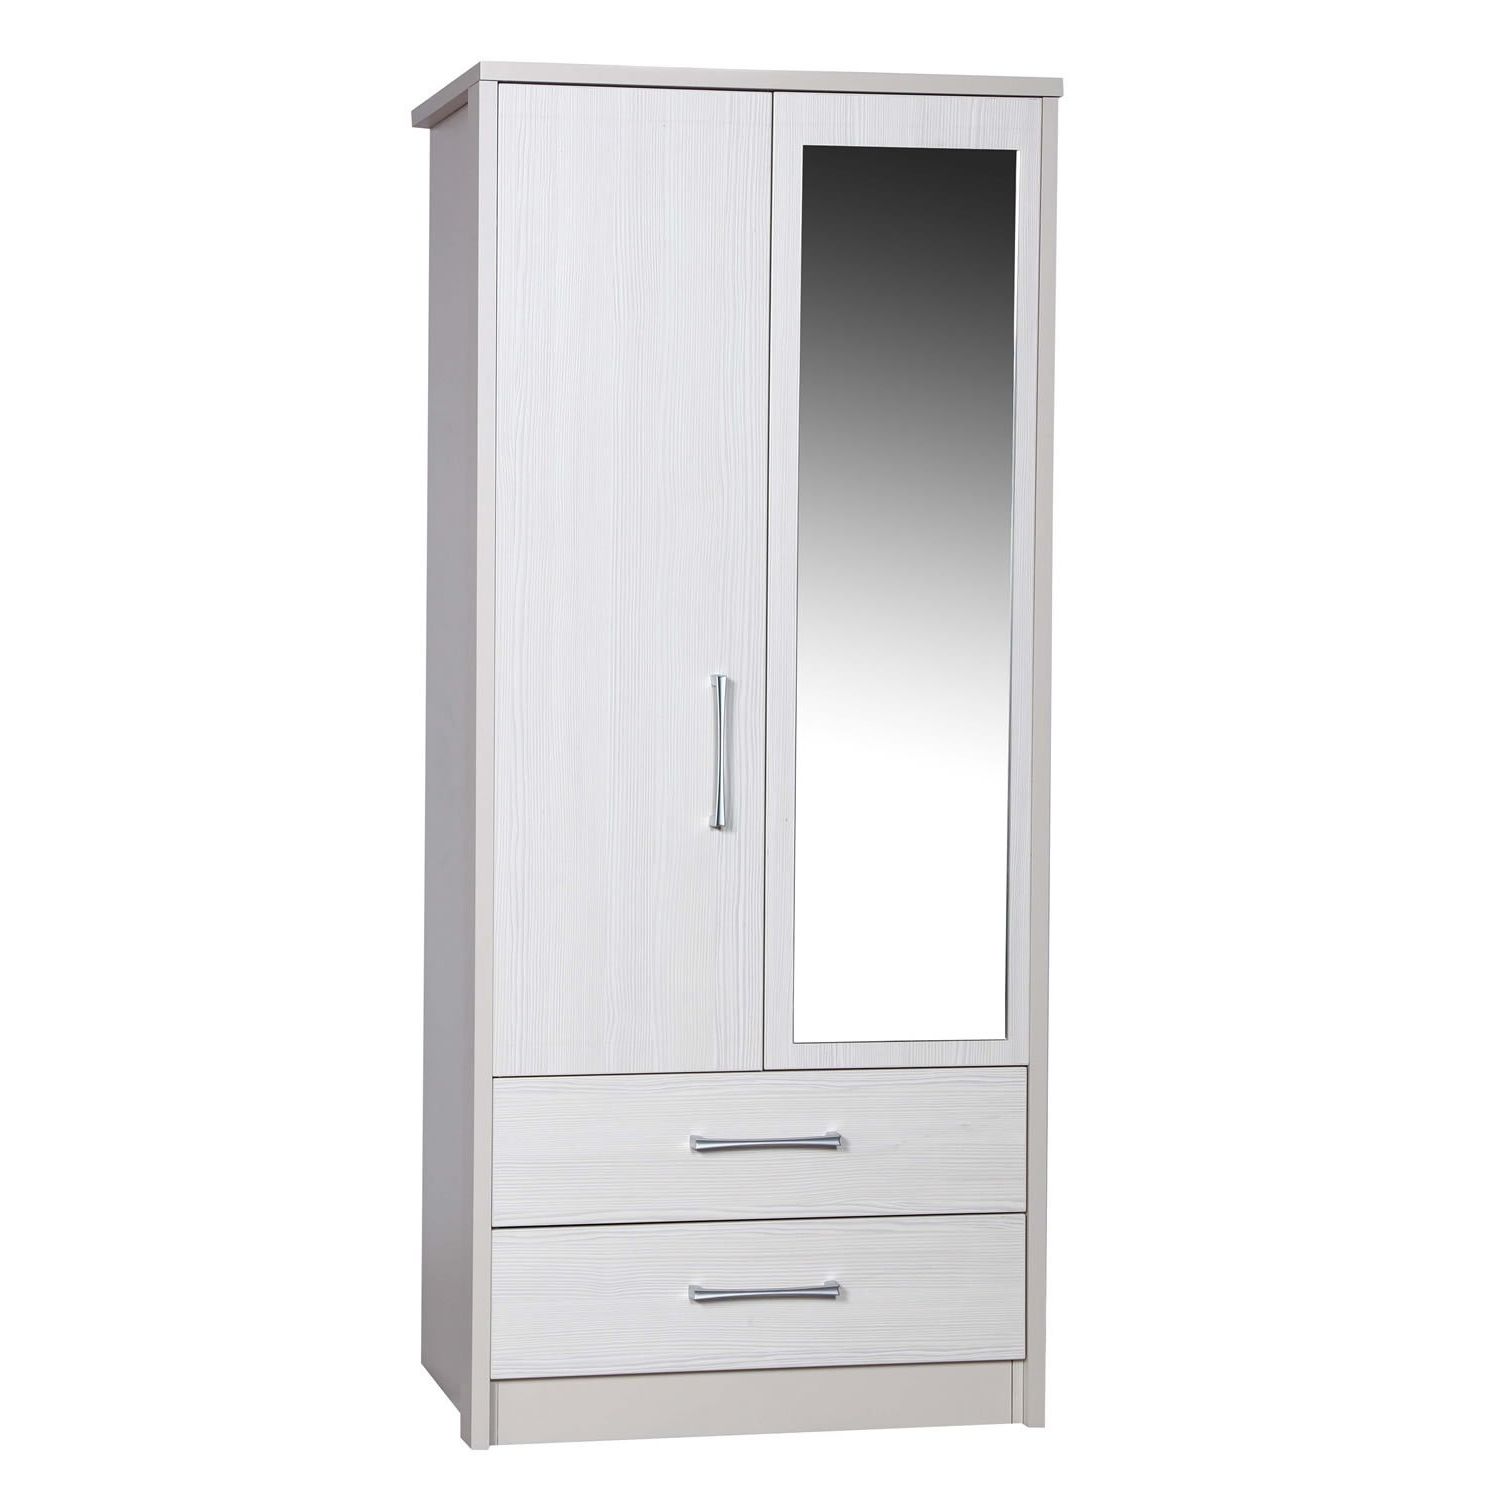 Cheap White Wardrobes Sets In Preferred Cheap White Wardrobe With Drawers 3 Door Childrens And Set This (View 14 of 15)